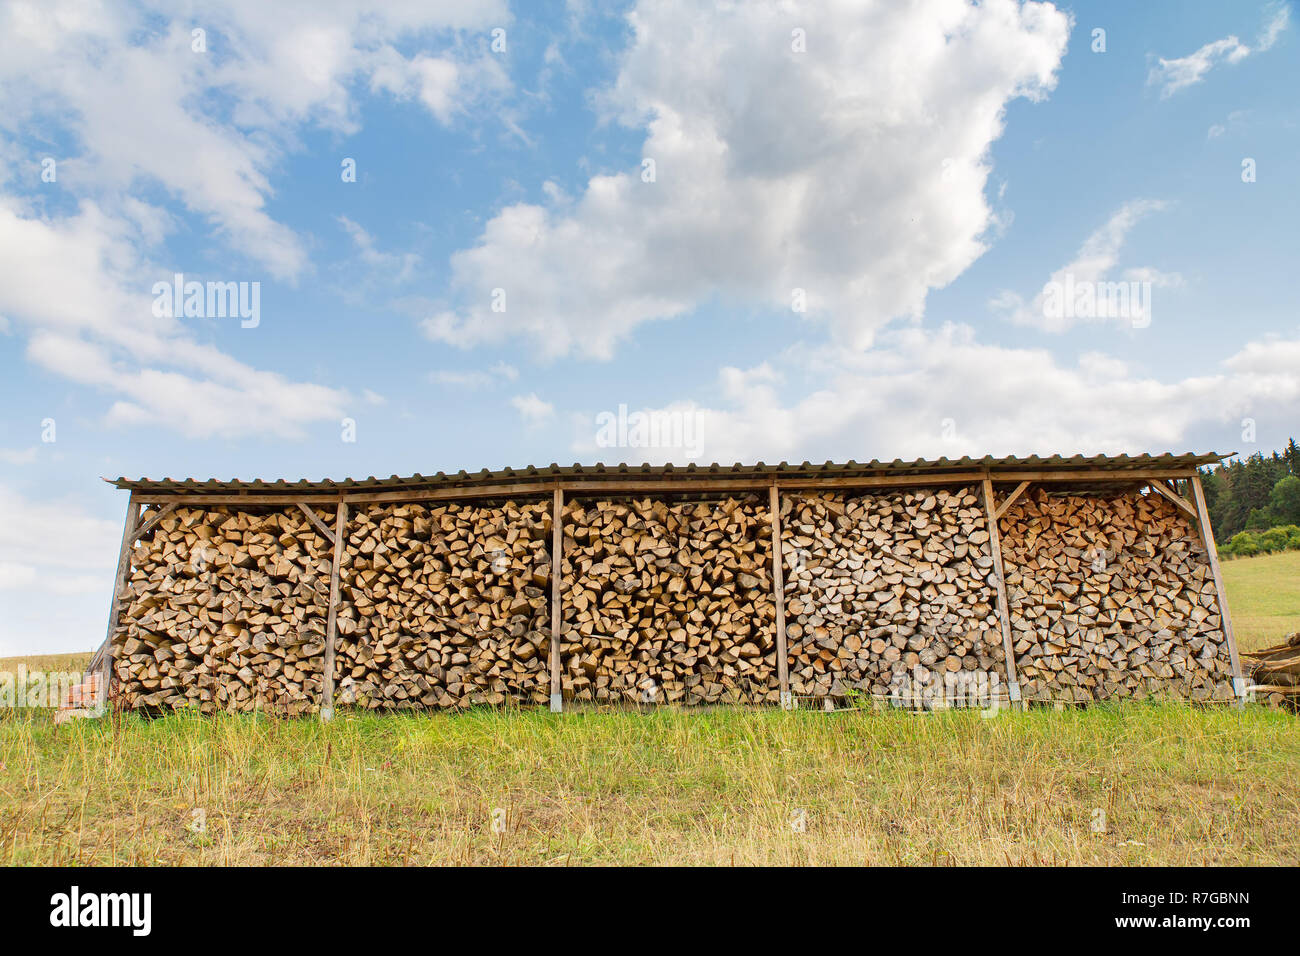 Shelter in Germany with many felled tree trunks for the stove Stock Photo